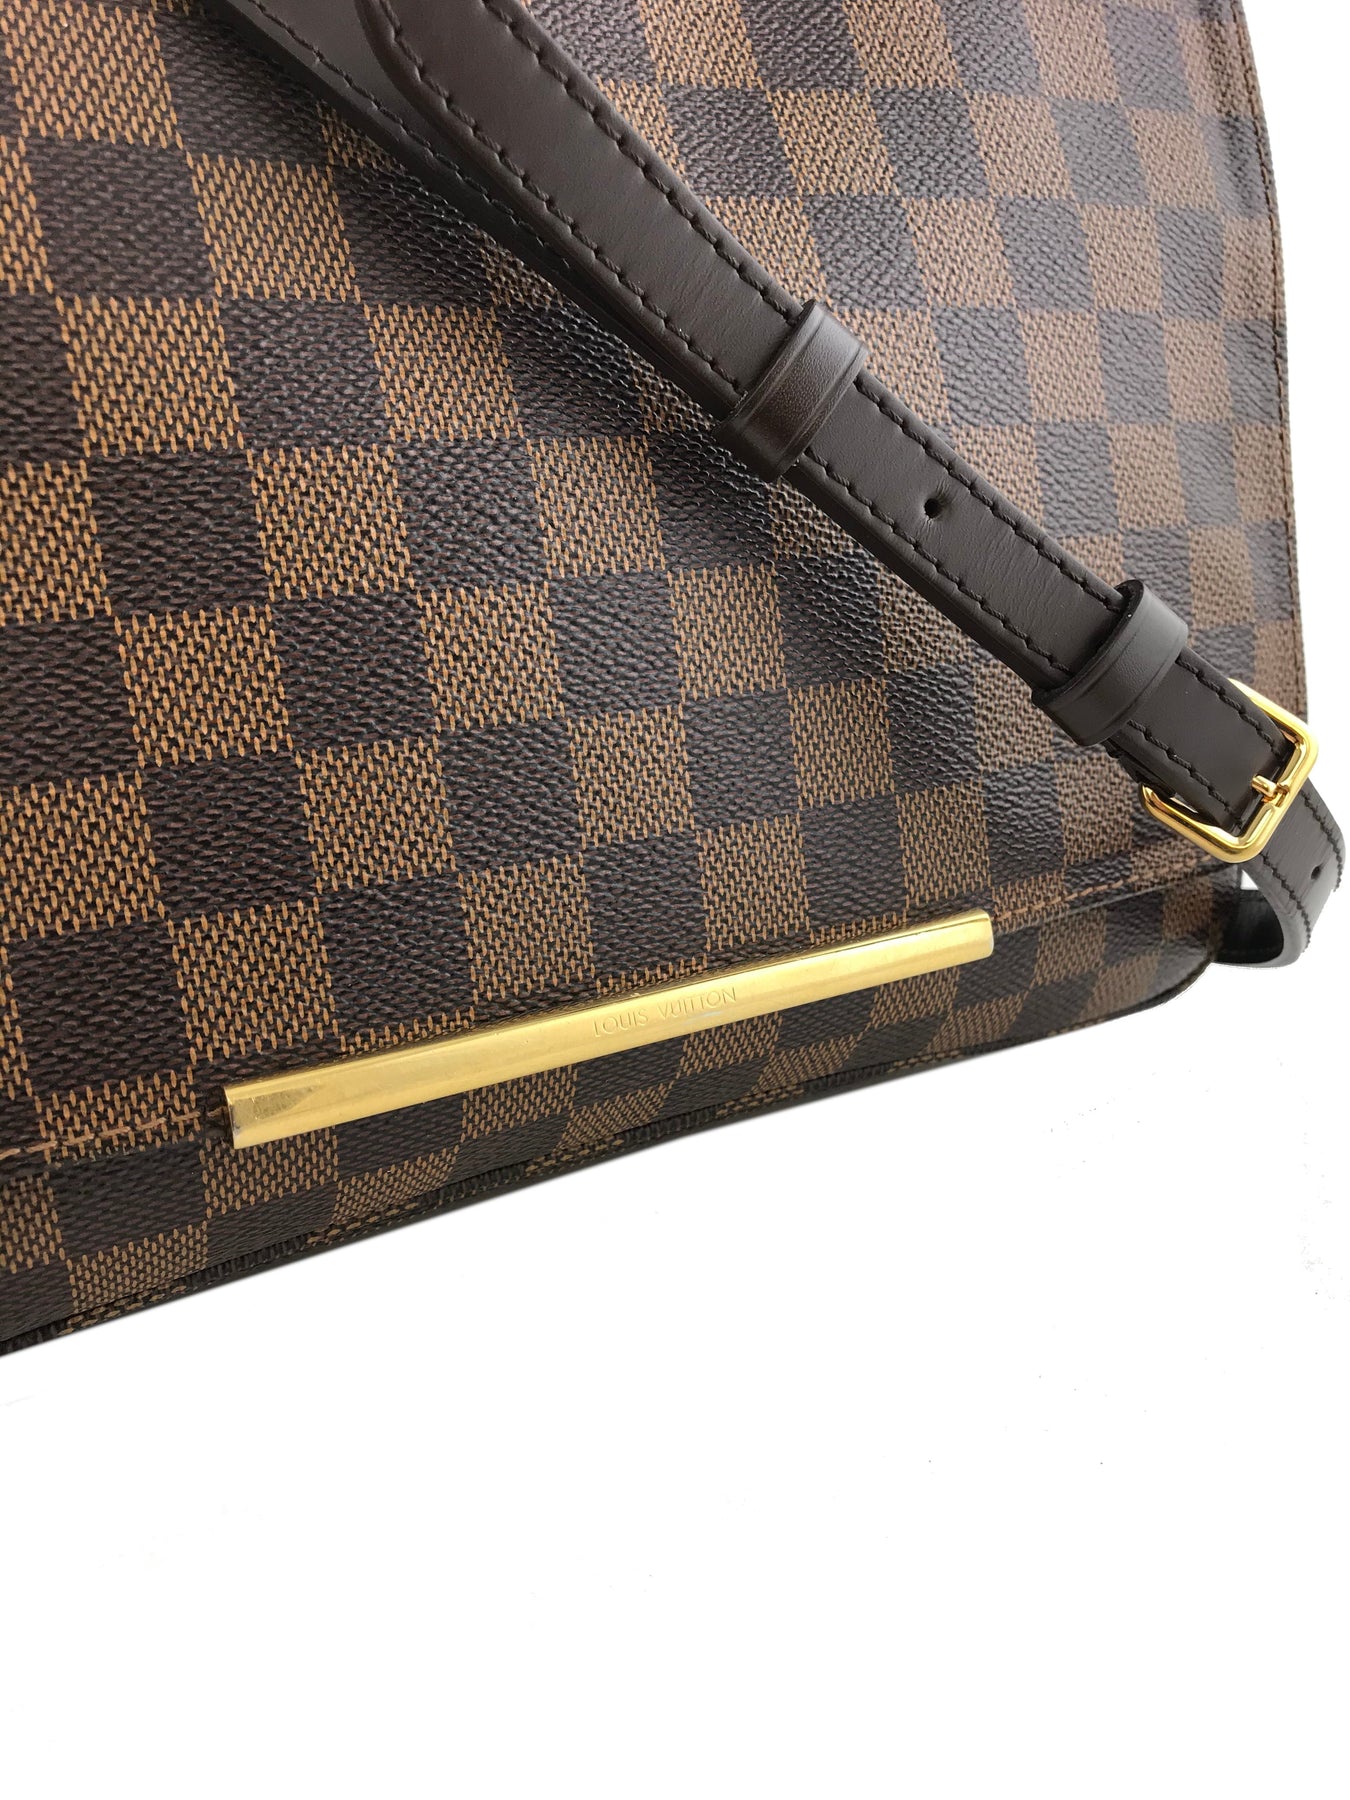 Louis Vuitton Hoxton GM Reveal & What Fits in the Bag